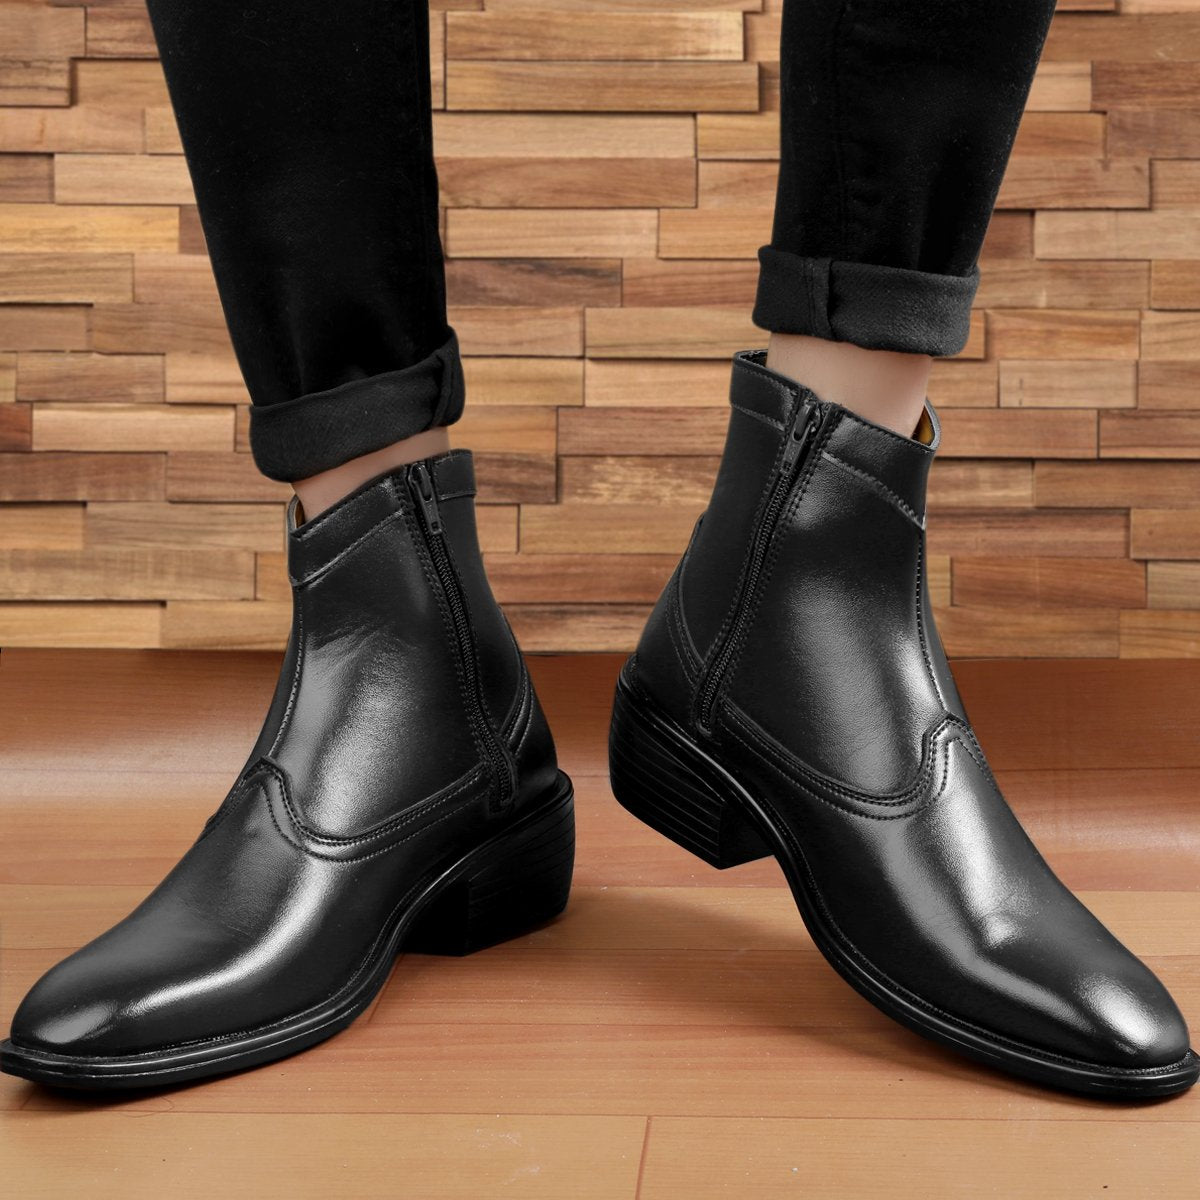 Black Height Increasing Boots